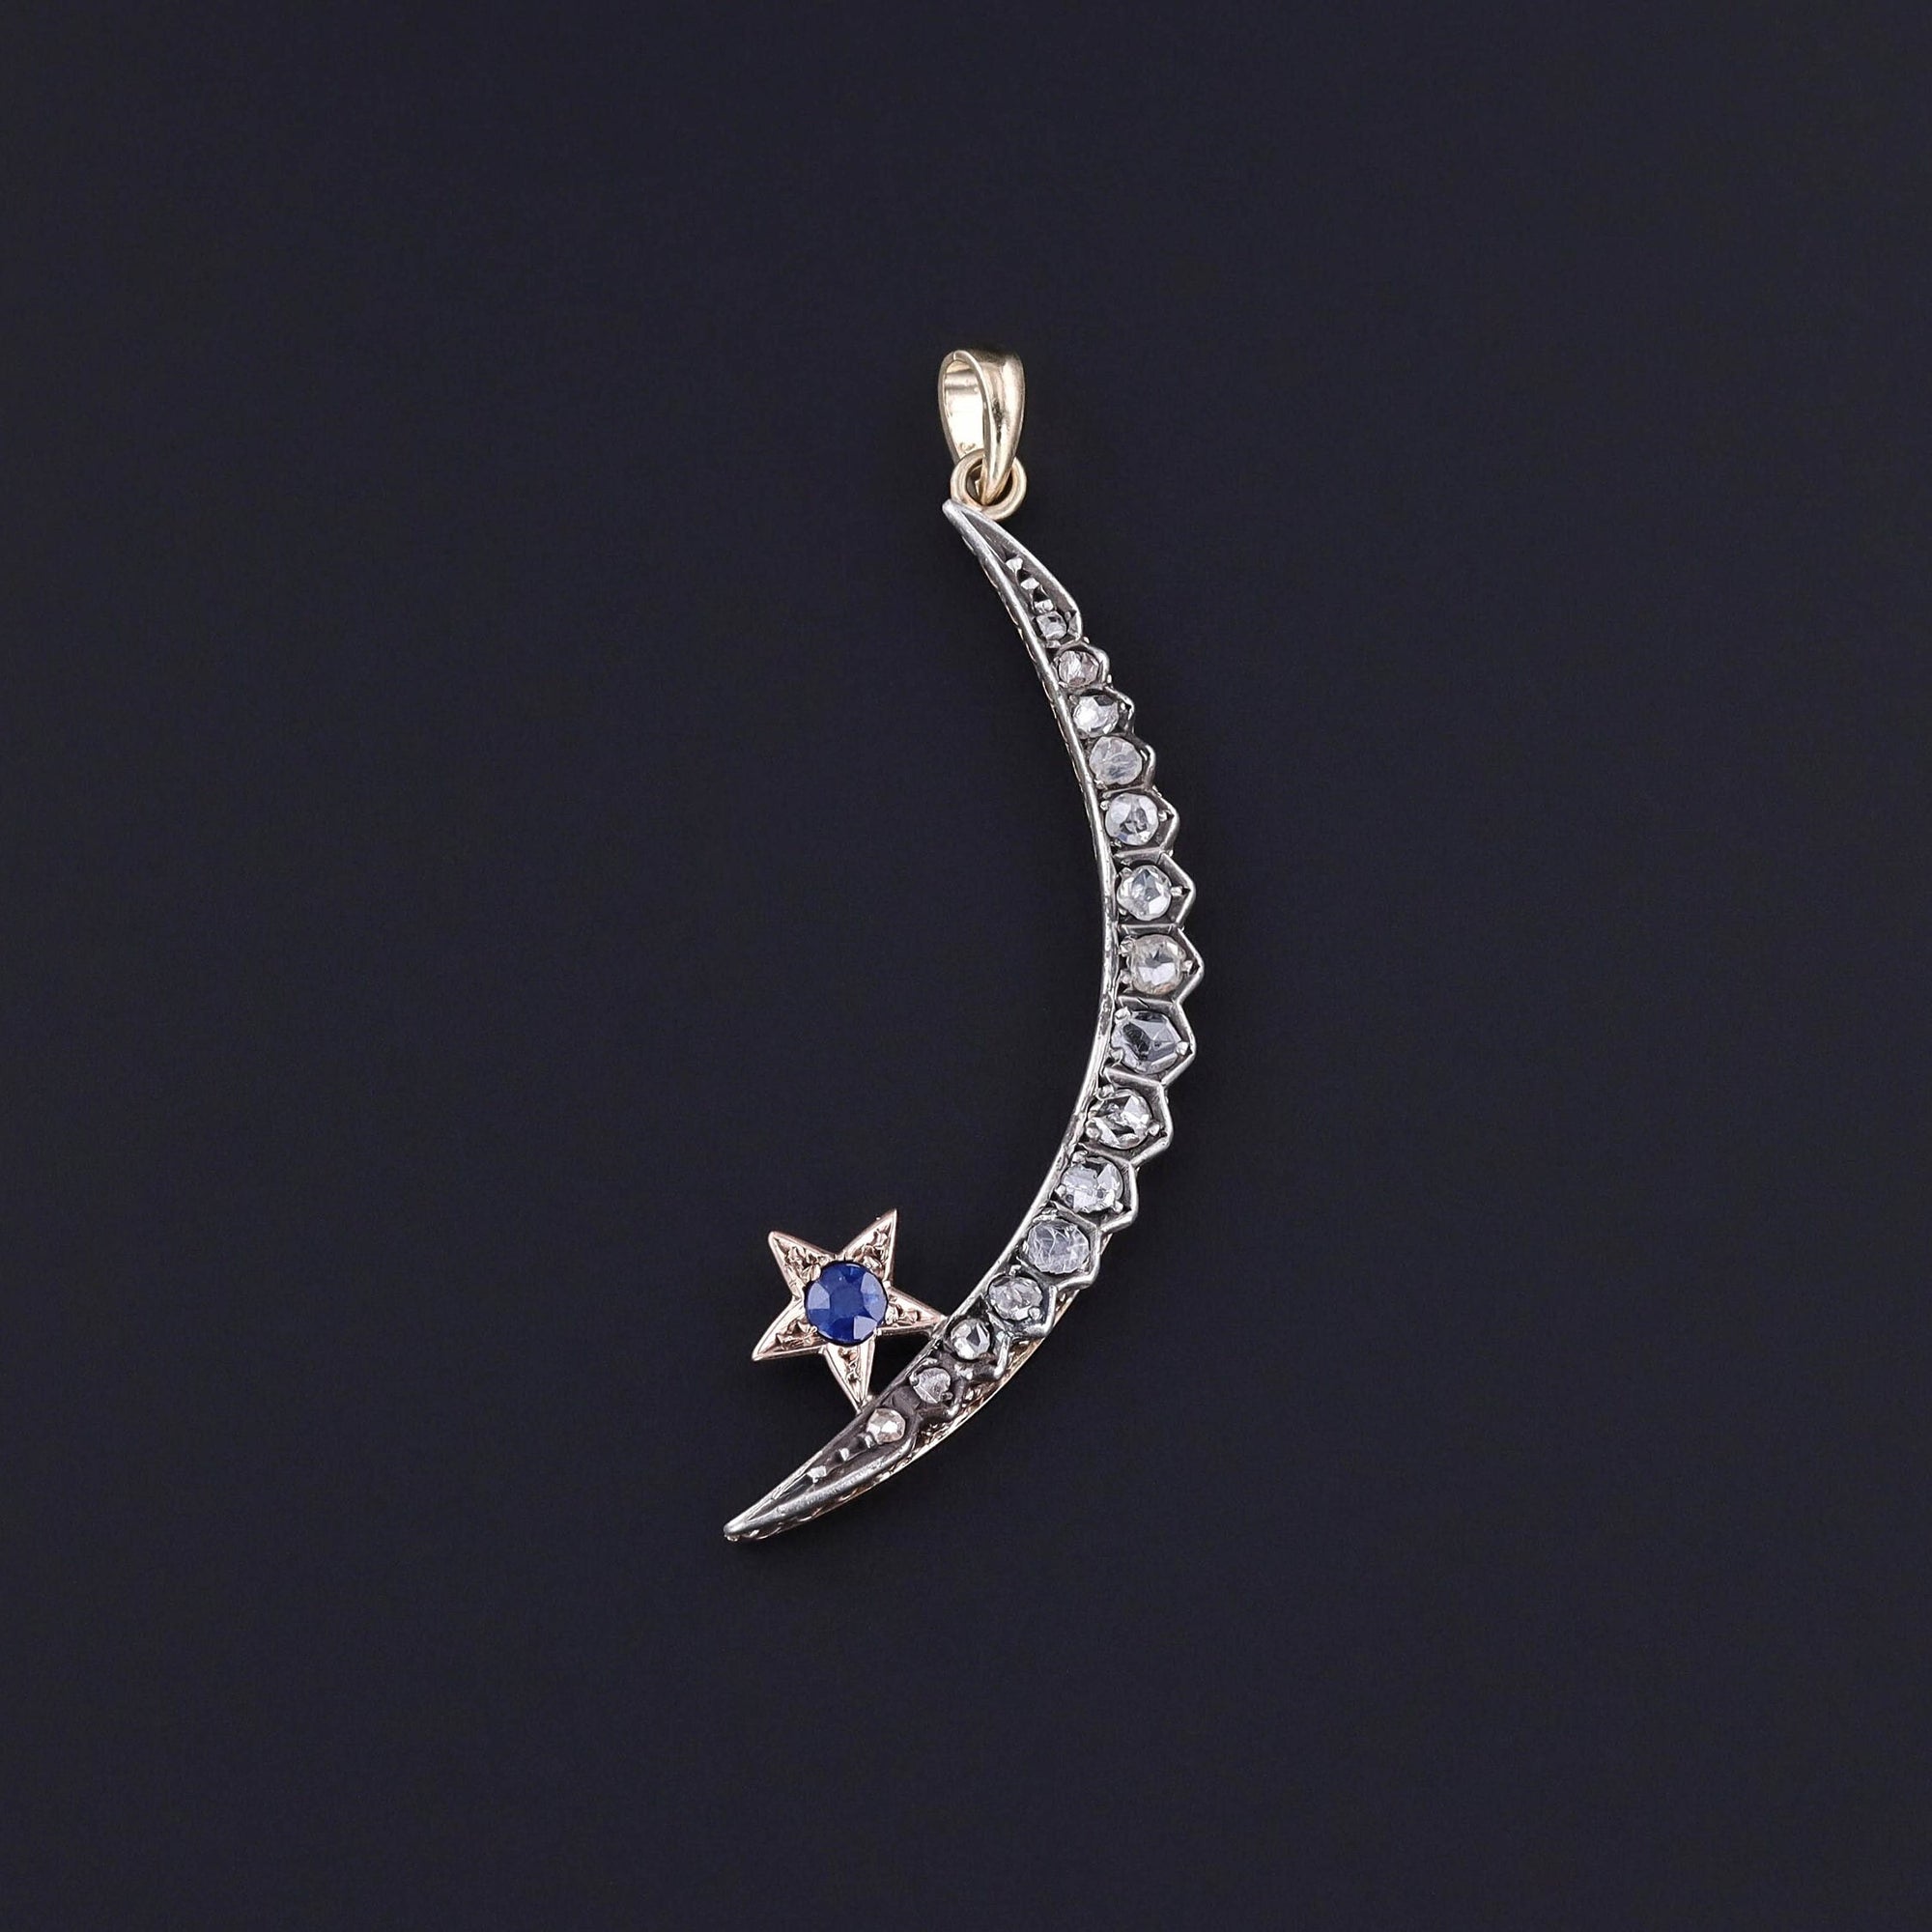 Antique diamond crescent moon pendant featuring rose-cut diamonds and a natural, untreated blue sapphire. It measures 2 inches in length by 0.6 inches in width. Perfect for vintage jewelry enthusiasts